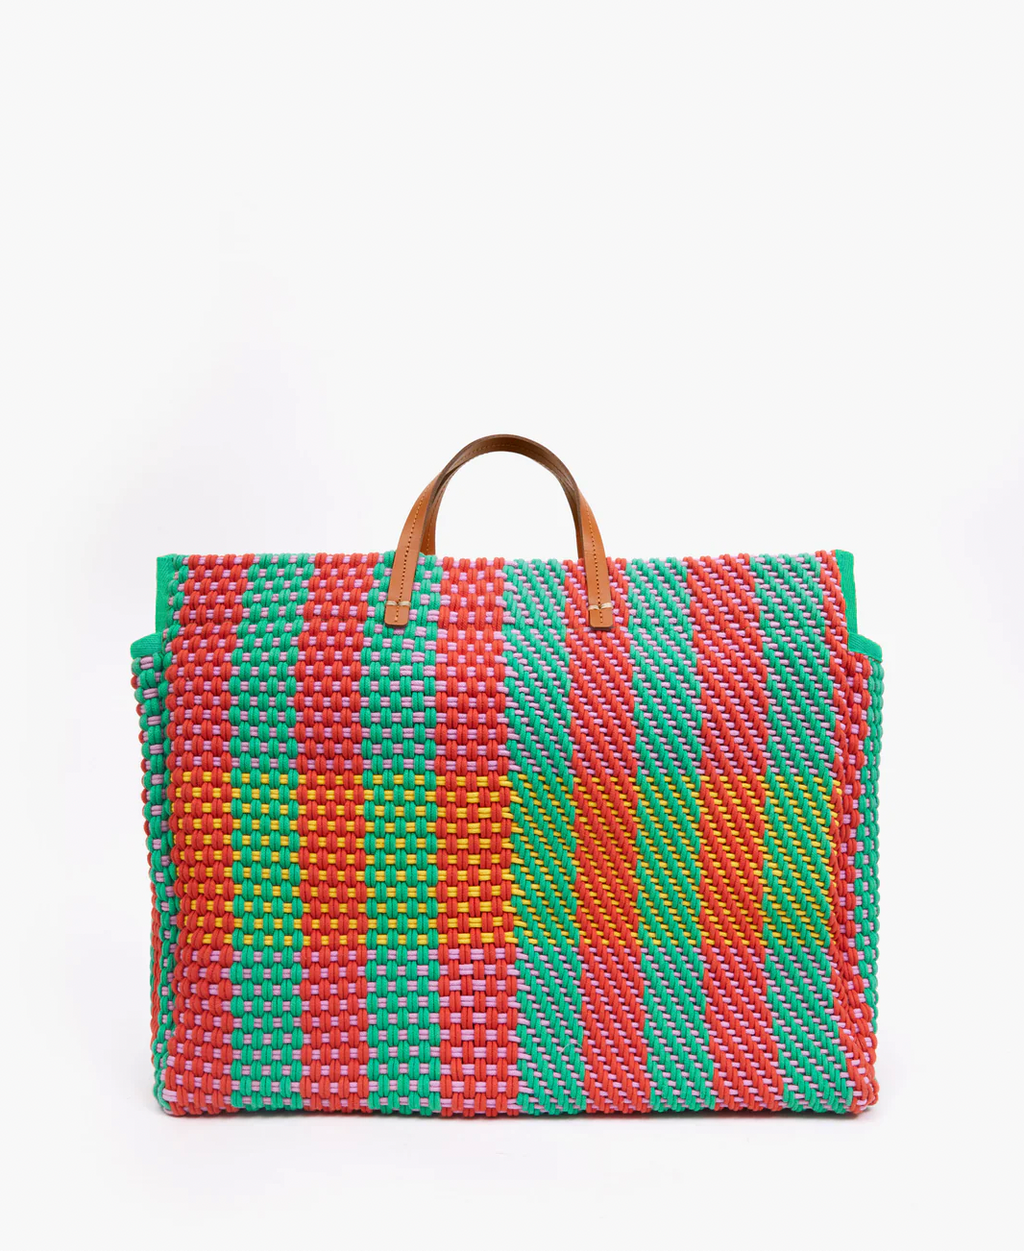 Clare V, Bags, New Knit Sweater Checkered Tote Bag